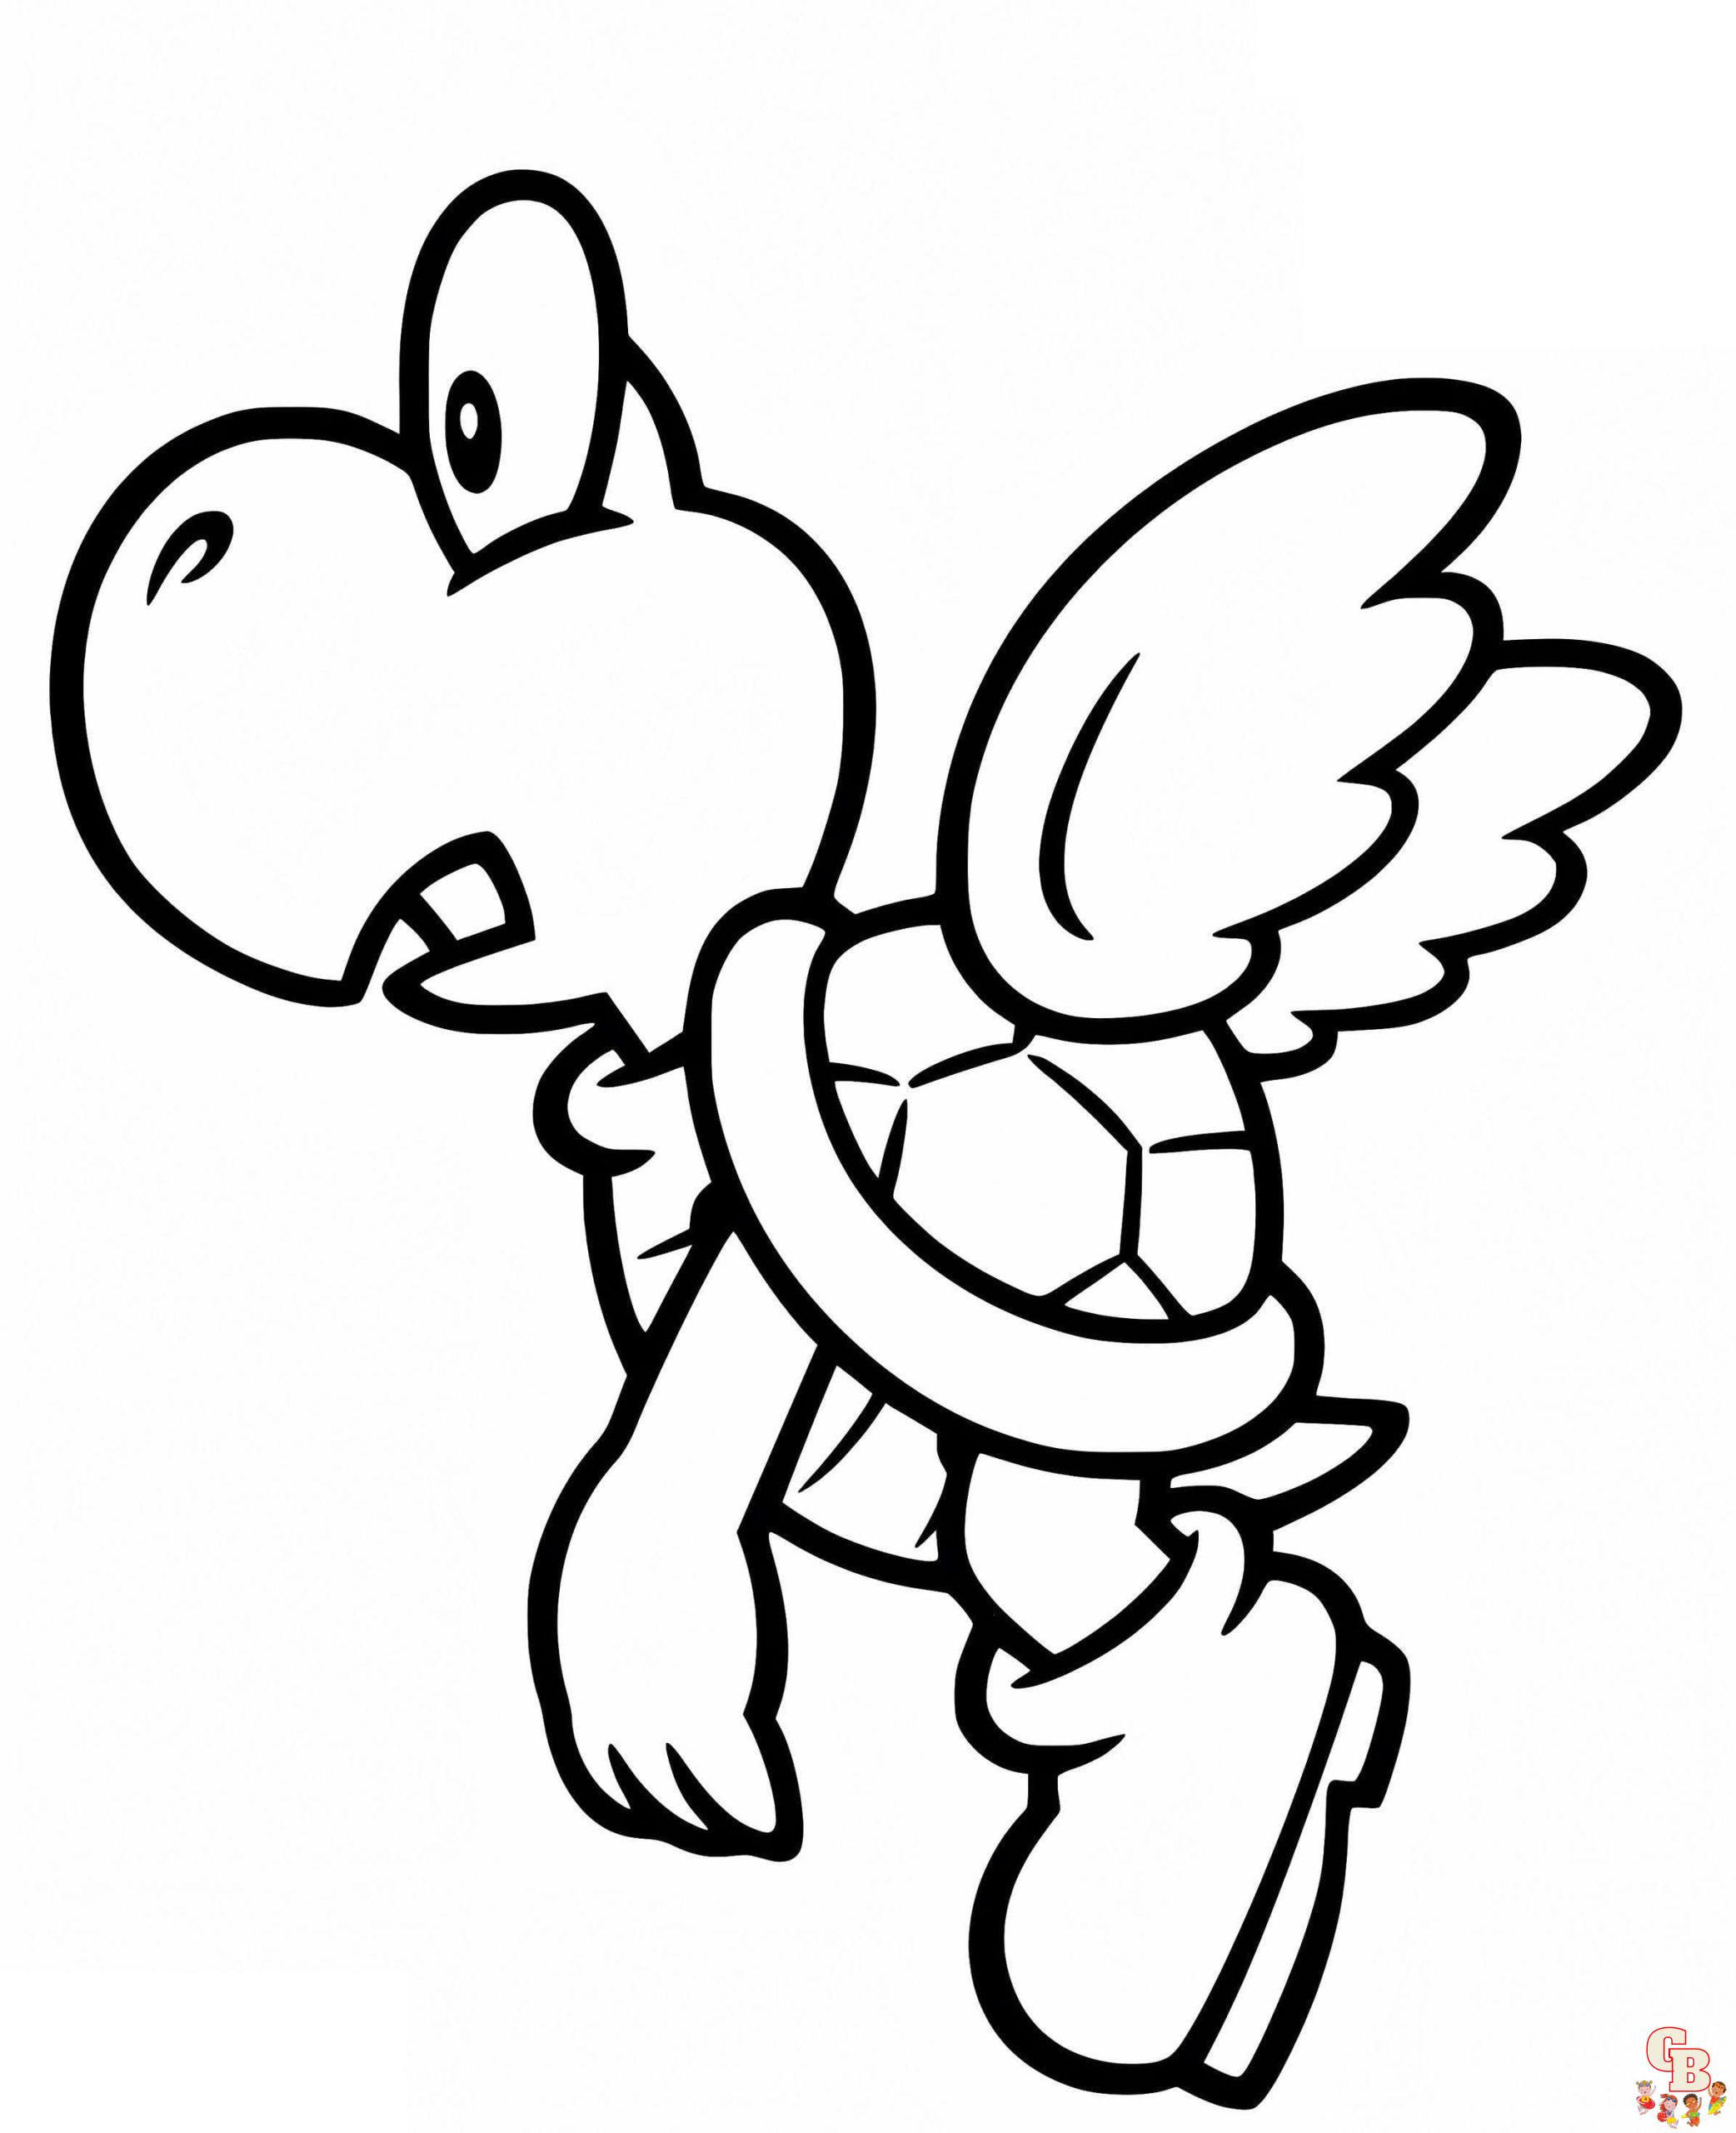 Koopa Troopa coloring pages free